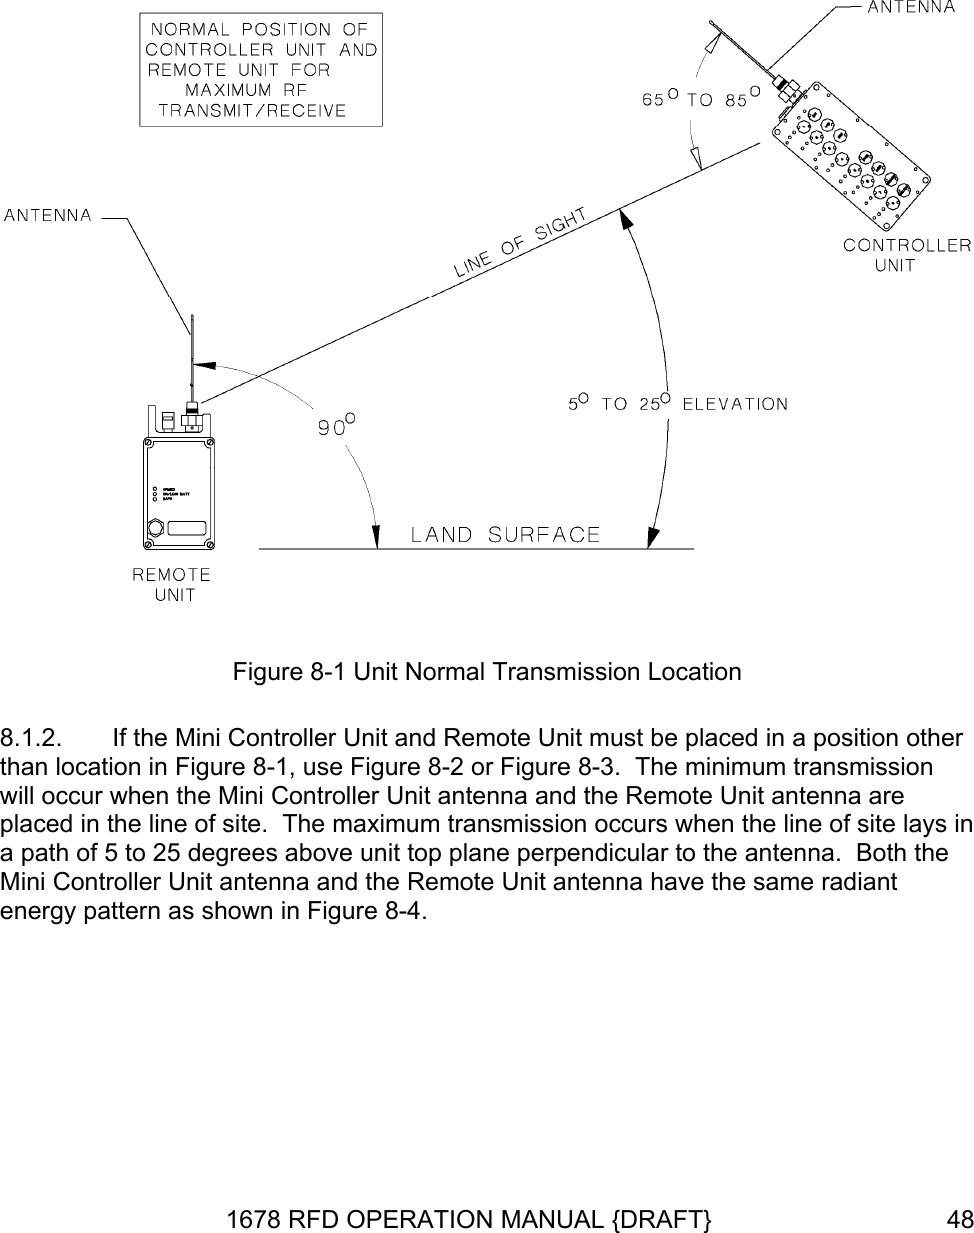  Figure 8-1 Unit Normal Transmission Location 8.1.2.  If the Mini Controller Unit and Remote Unit must be placed in a position other than location in Figure 8-1, use Figure 8-2 or Figure 8-3.  The minimum transmission will occur when the Mini Controller Unit antenna and the Remote Unit antenna are placed in the line of site.  The maximum transmission occurs when the line of site lays in a path of 5 to 25 degrees above unit top plane perpendicular to the antenna.  Both the Mini Controller Unit antenna and the Remote Unit antenna have the same radiant energy pattern as shown in Figure 8-4. 1678 RFD OPERATION MANUAL {DRAFT}  48